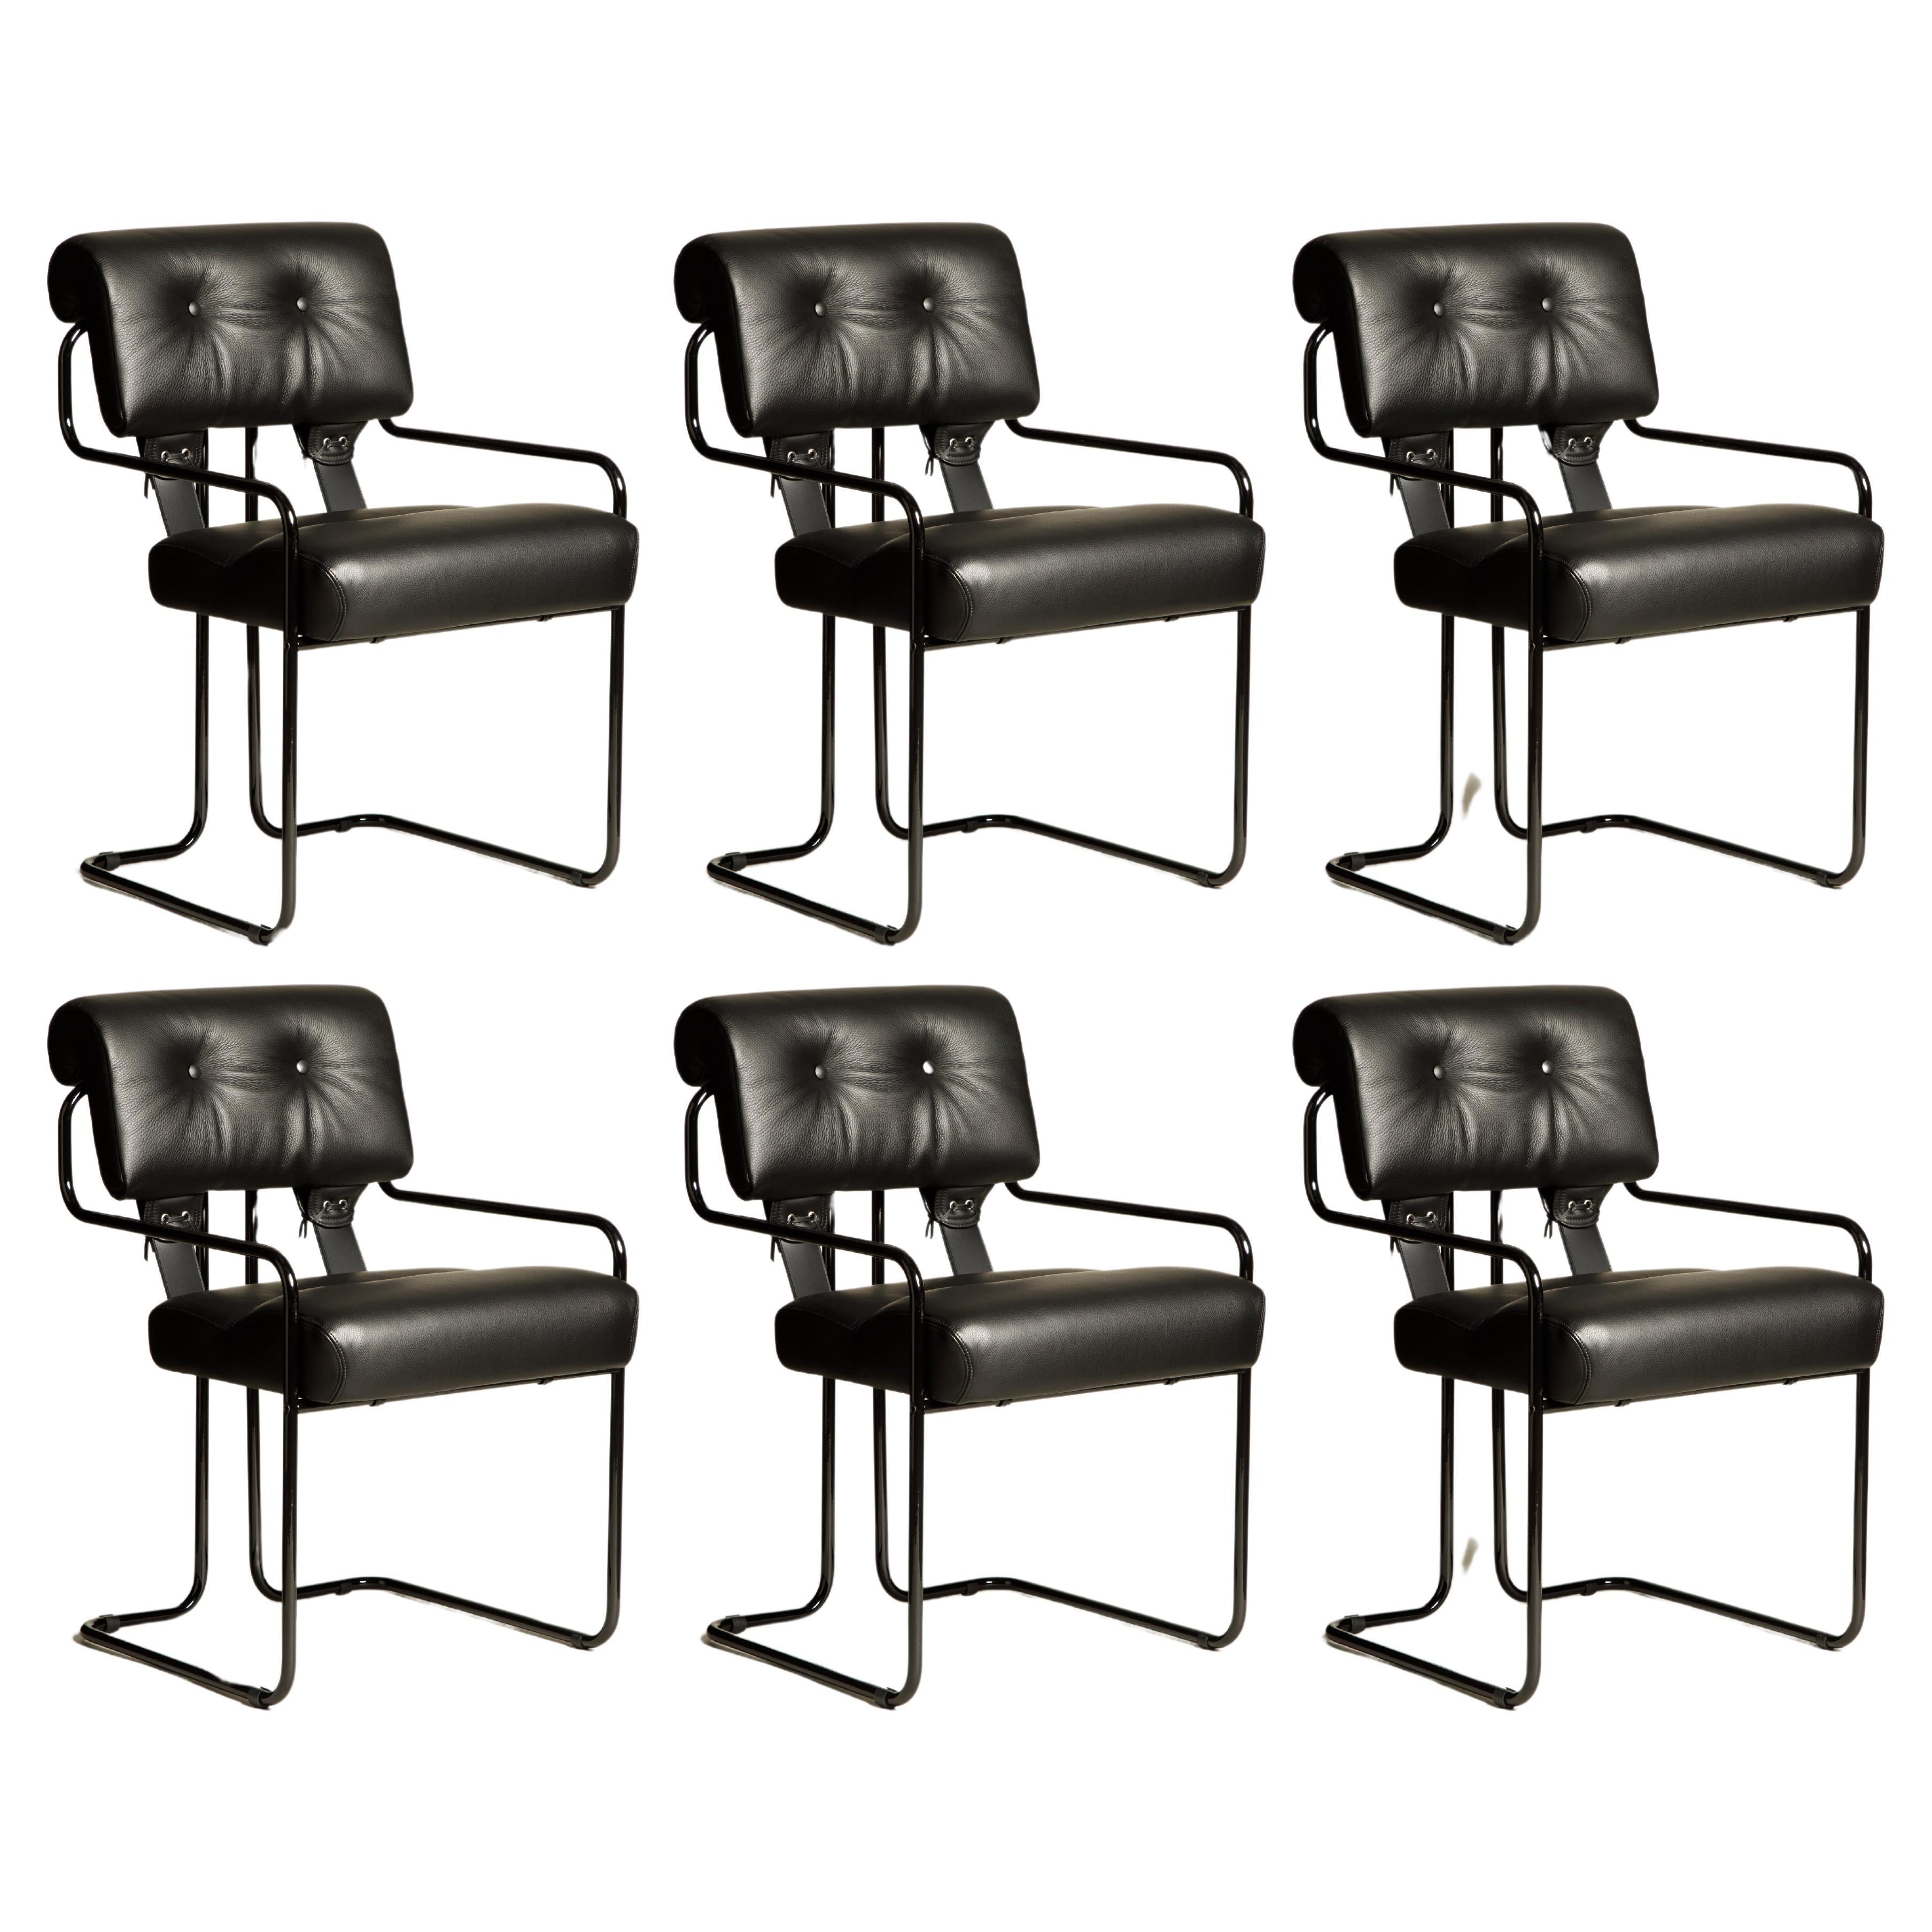 Six Black Leather Tucroma Chairs by Guido Faleschini for Mariani, Brand New